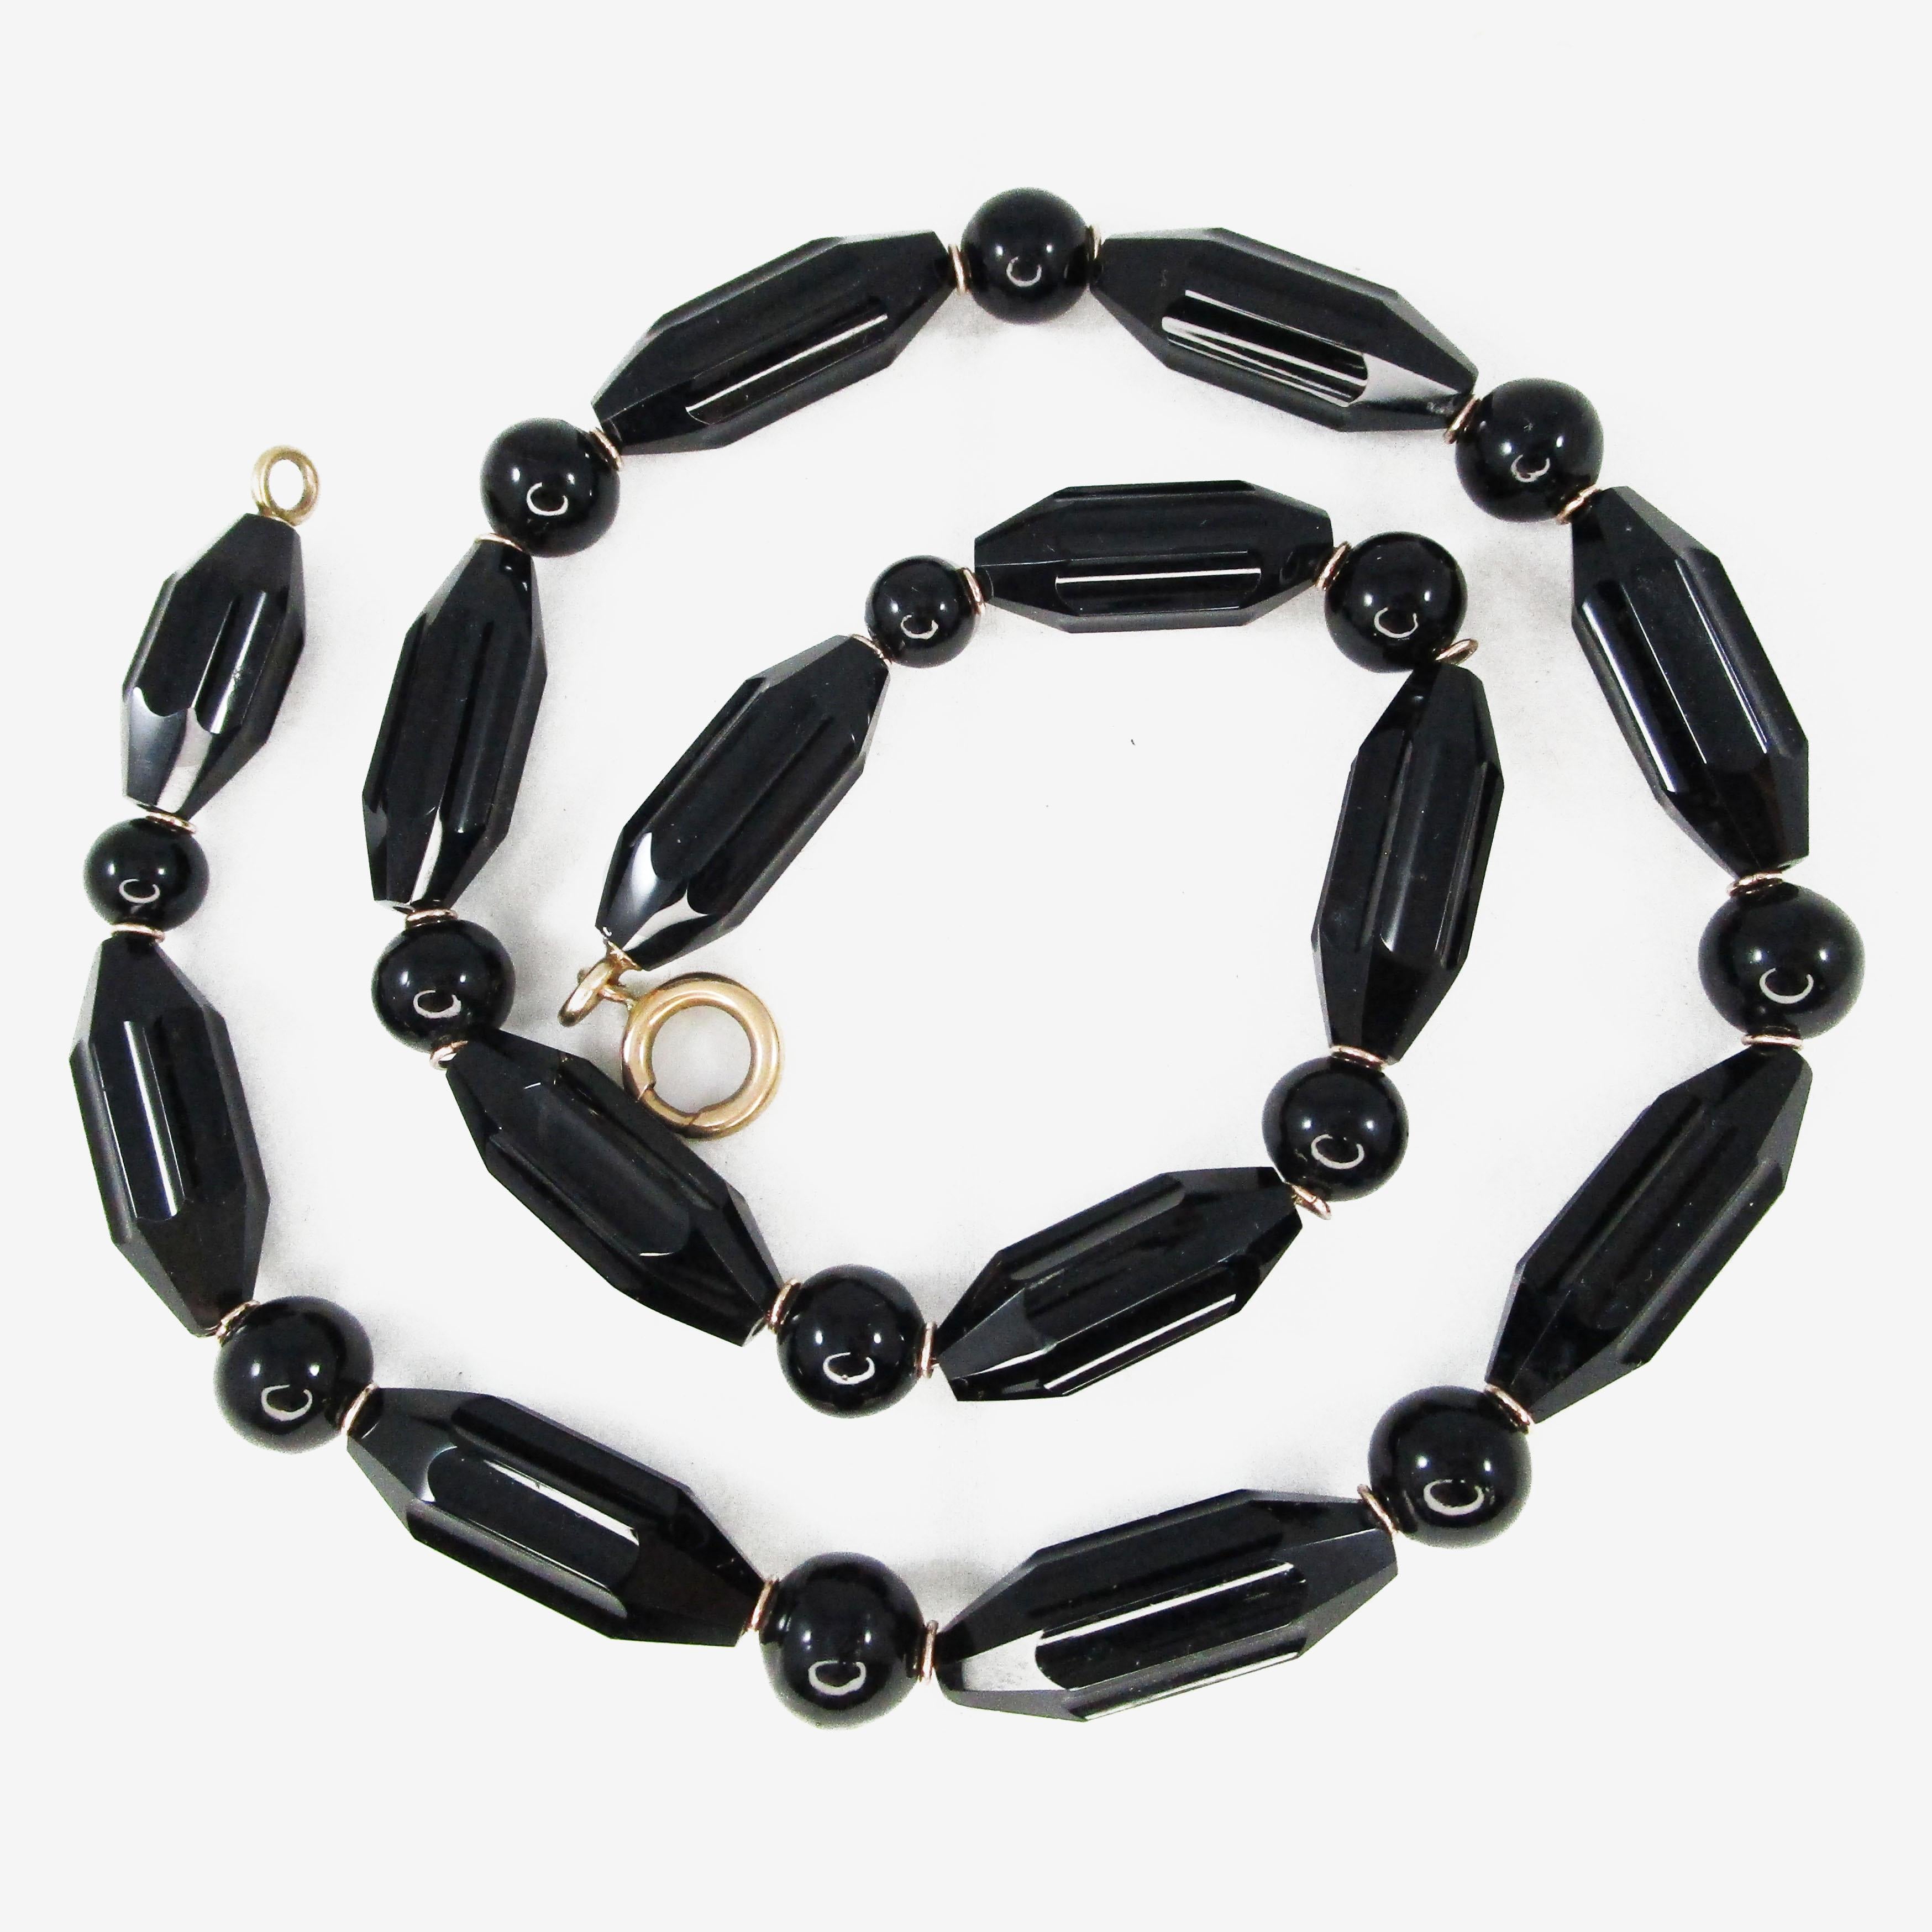 This necklace is THE necklace of all time!! It is an original Victorian piece in excellent condition--the black onyx beads have no chips or scratches, and the yellow gold clasps and links are positively gleaming! This necklace would've been made to